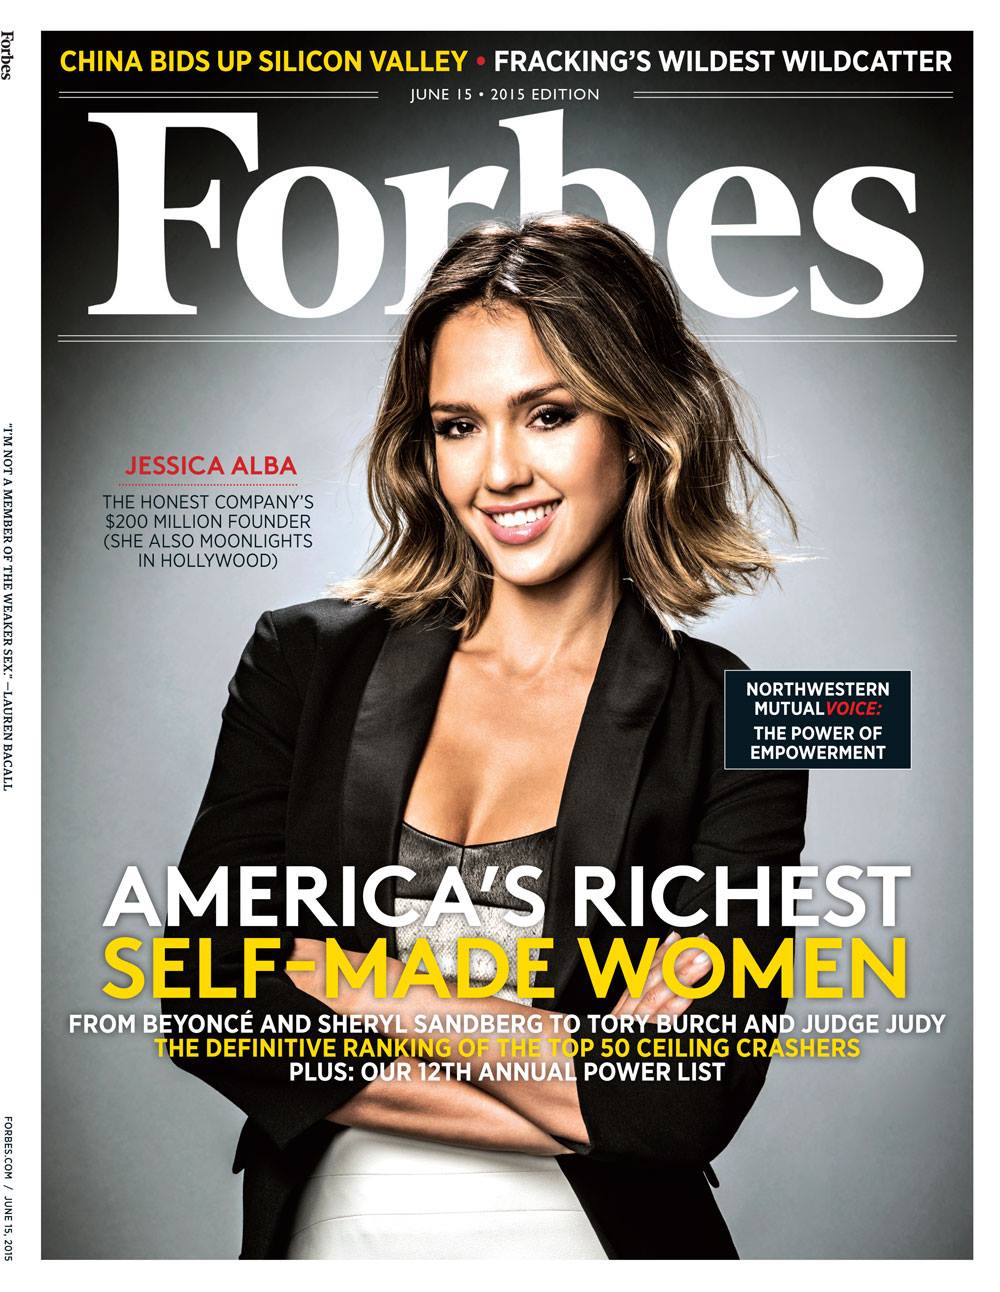 Forbes list of America’s richest self-made women, 2015